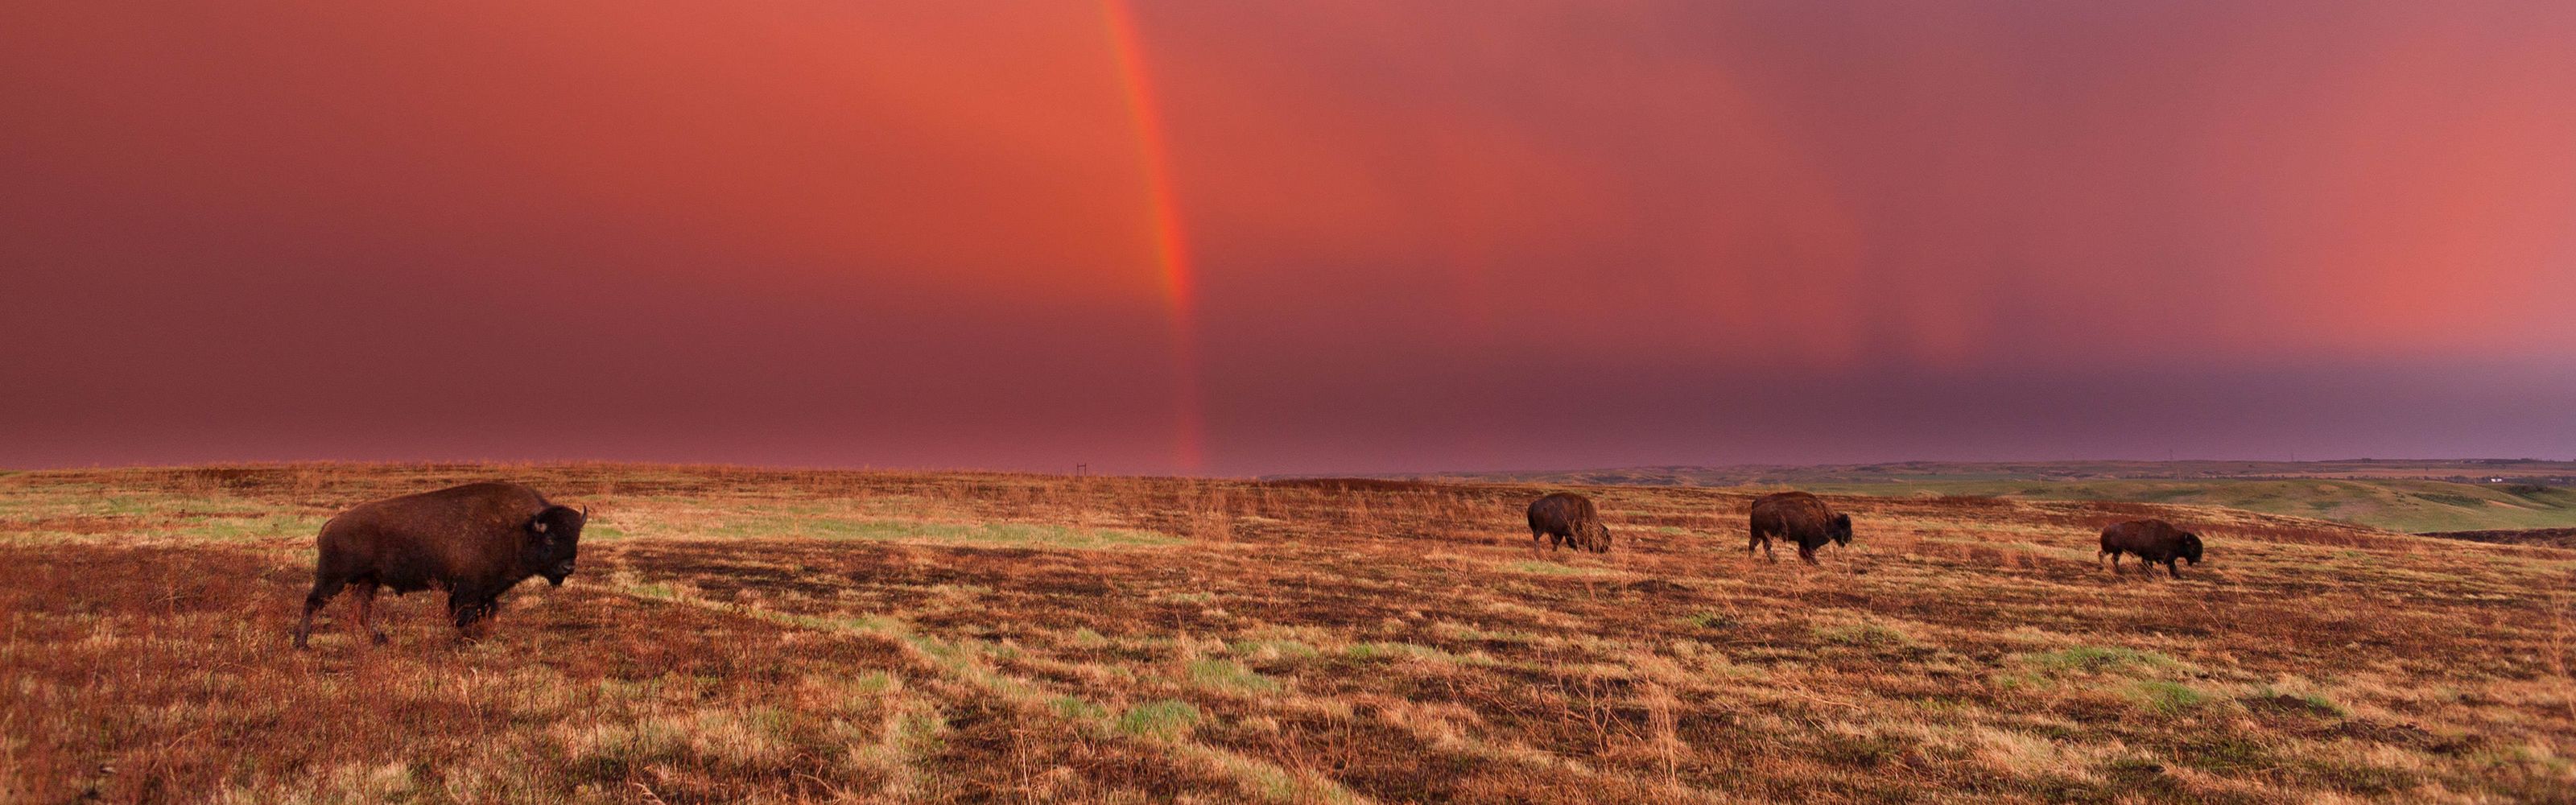 Bison and rainbow at TNC's Cross Ranch preserve in North Dakota.